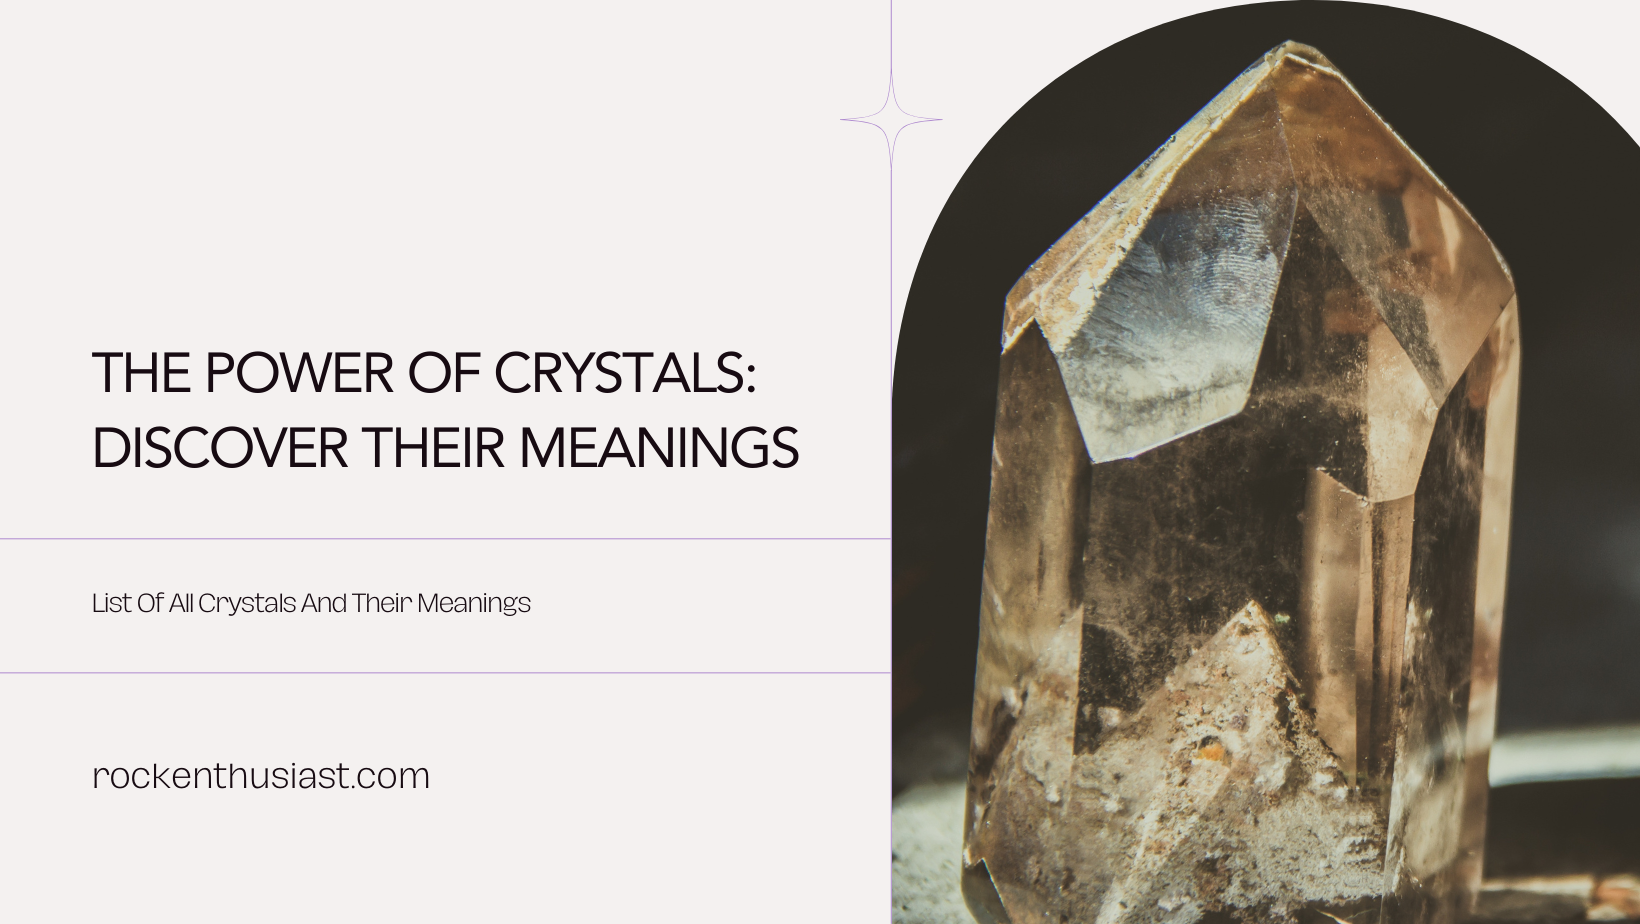 List Of All Crystals And Their Meanings